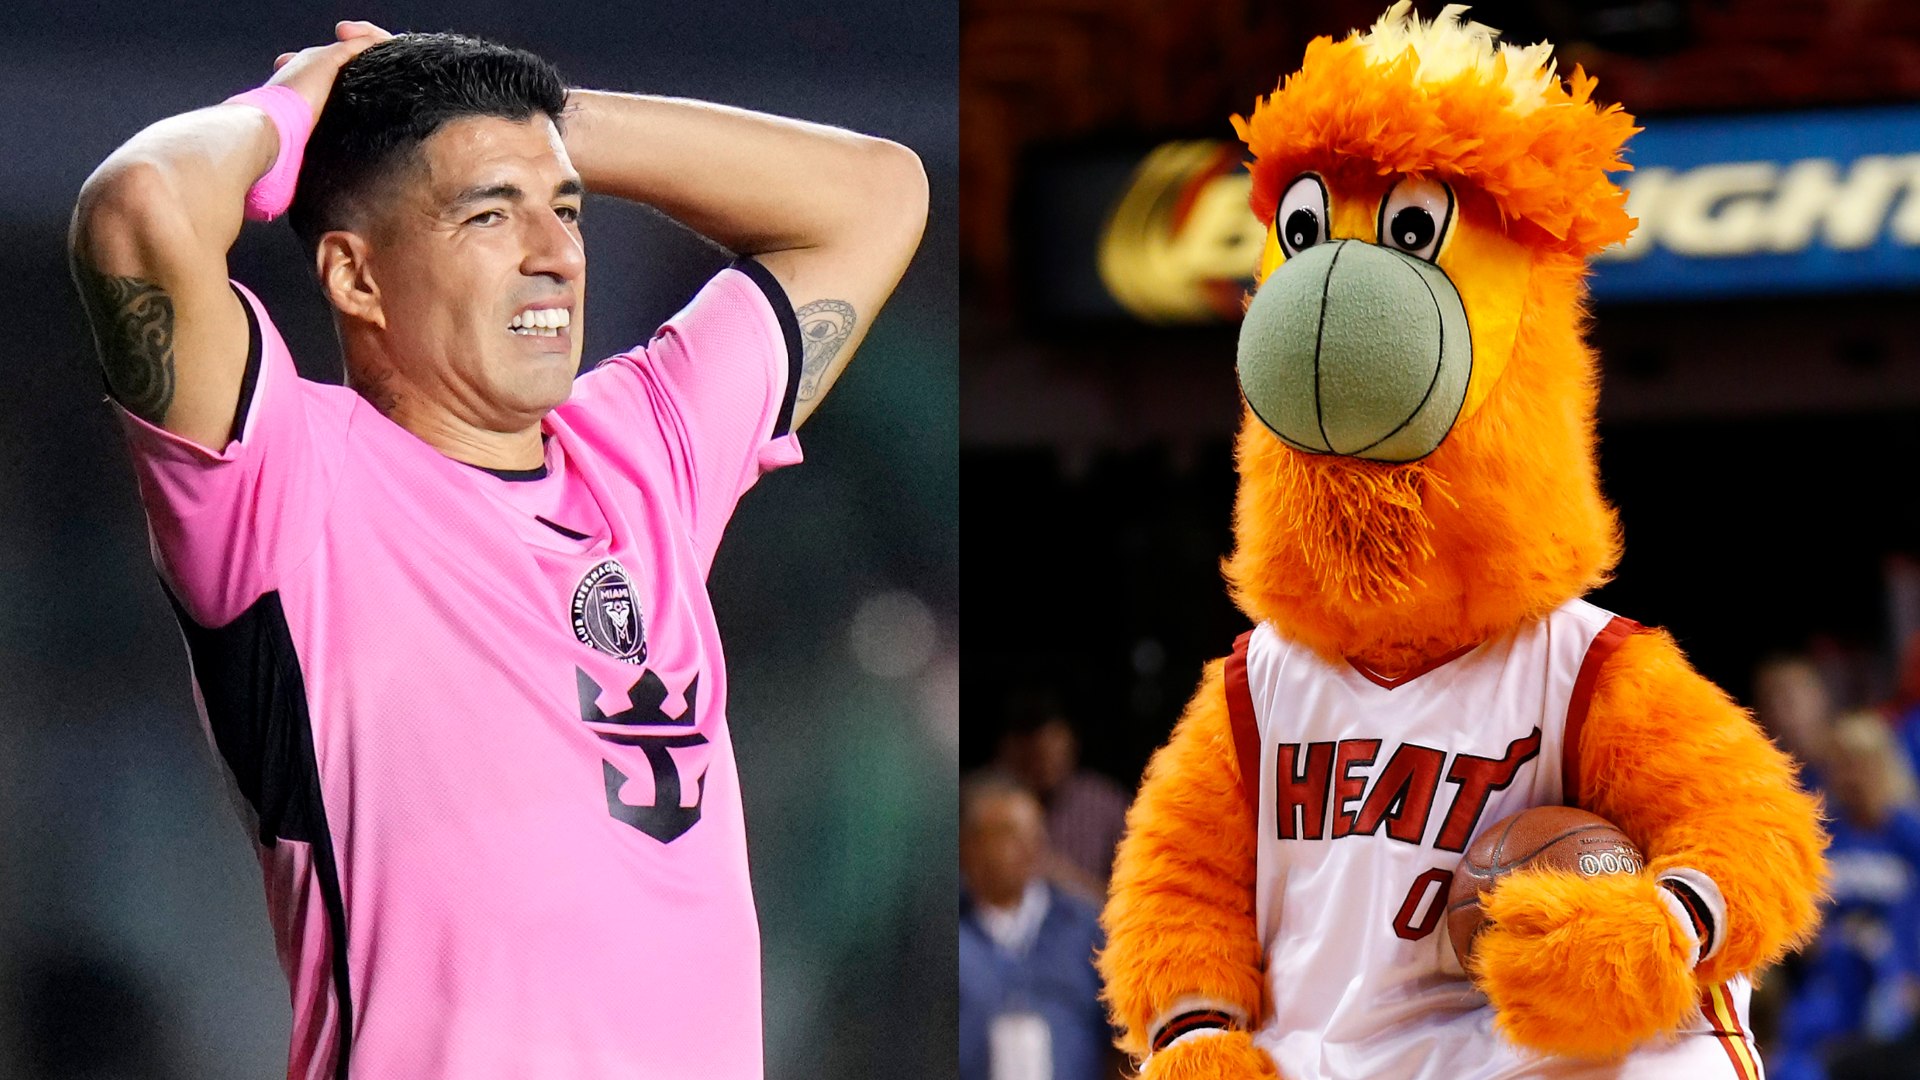 VIDEO: Luis Suarez’s keepy-uppy fail with Miami Heat mascot! Lionel Messi’s MLS team-mate let down by Burnie during visit to NBA game thumbnail